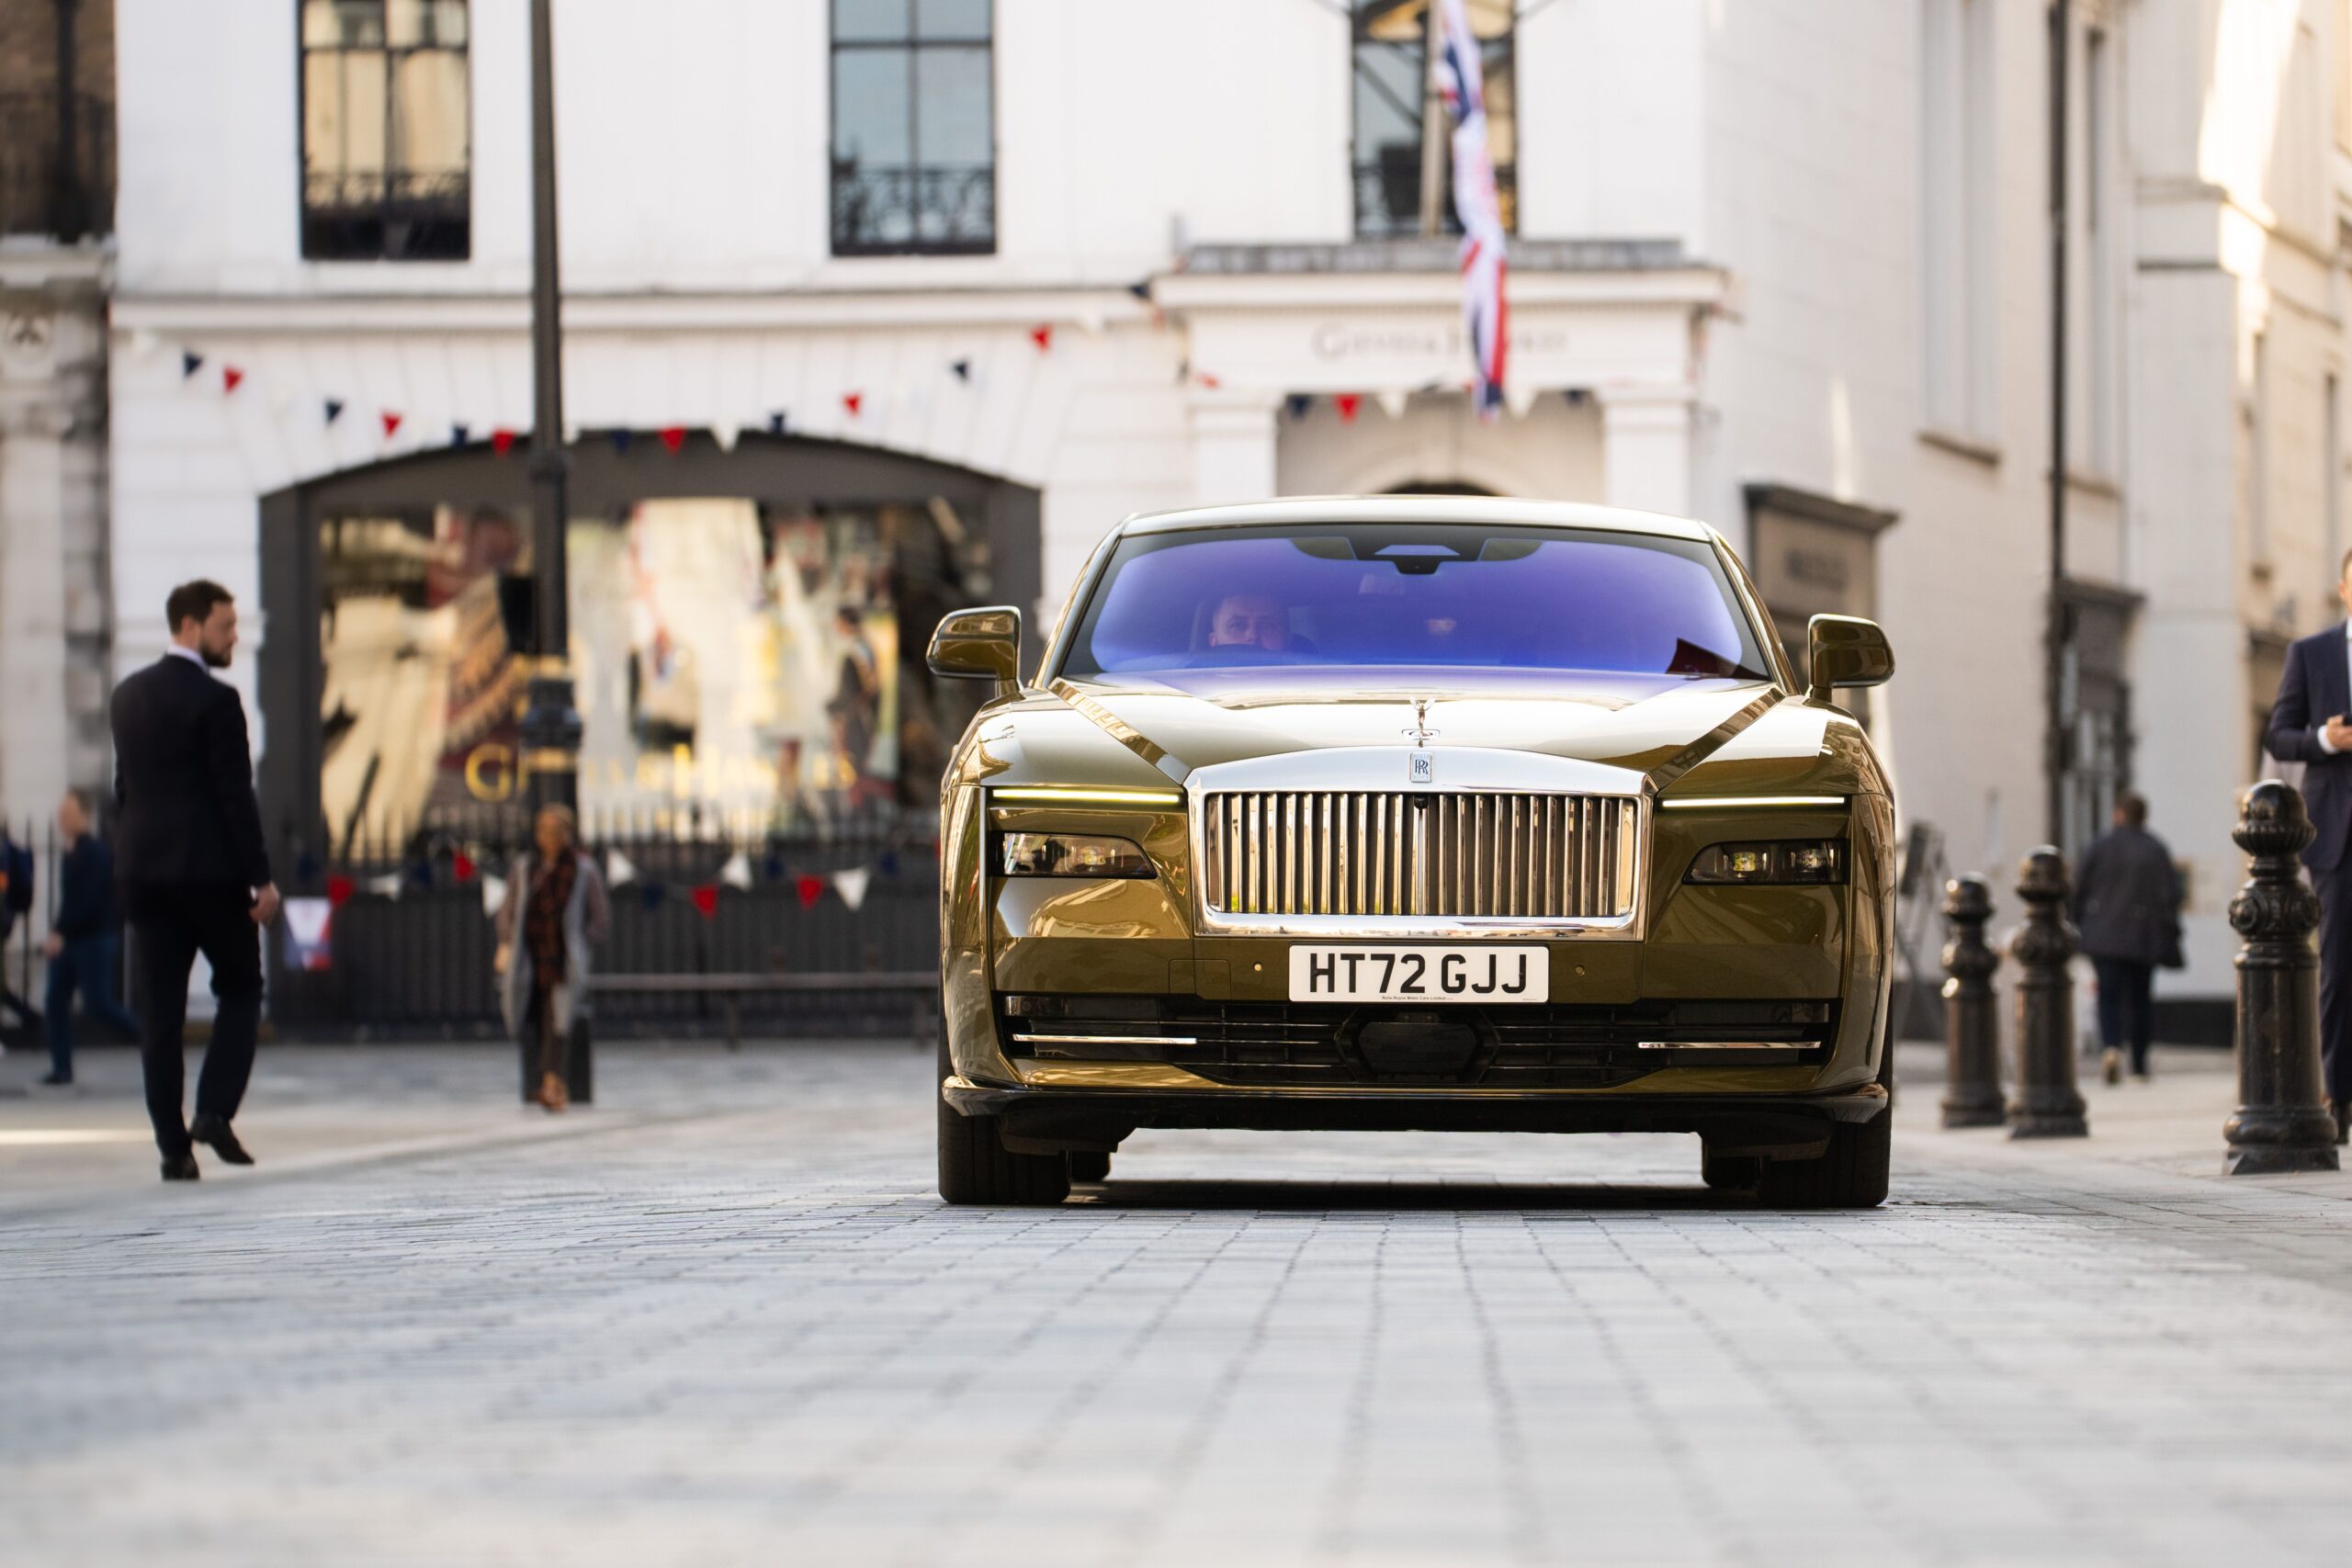 Rolls-Royce Motor Cars All-electric Super Coupé, Spectre: Ready for the Future